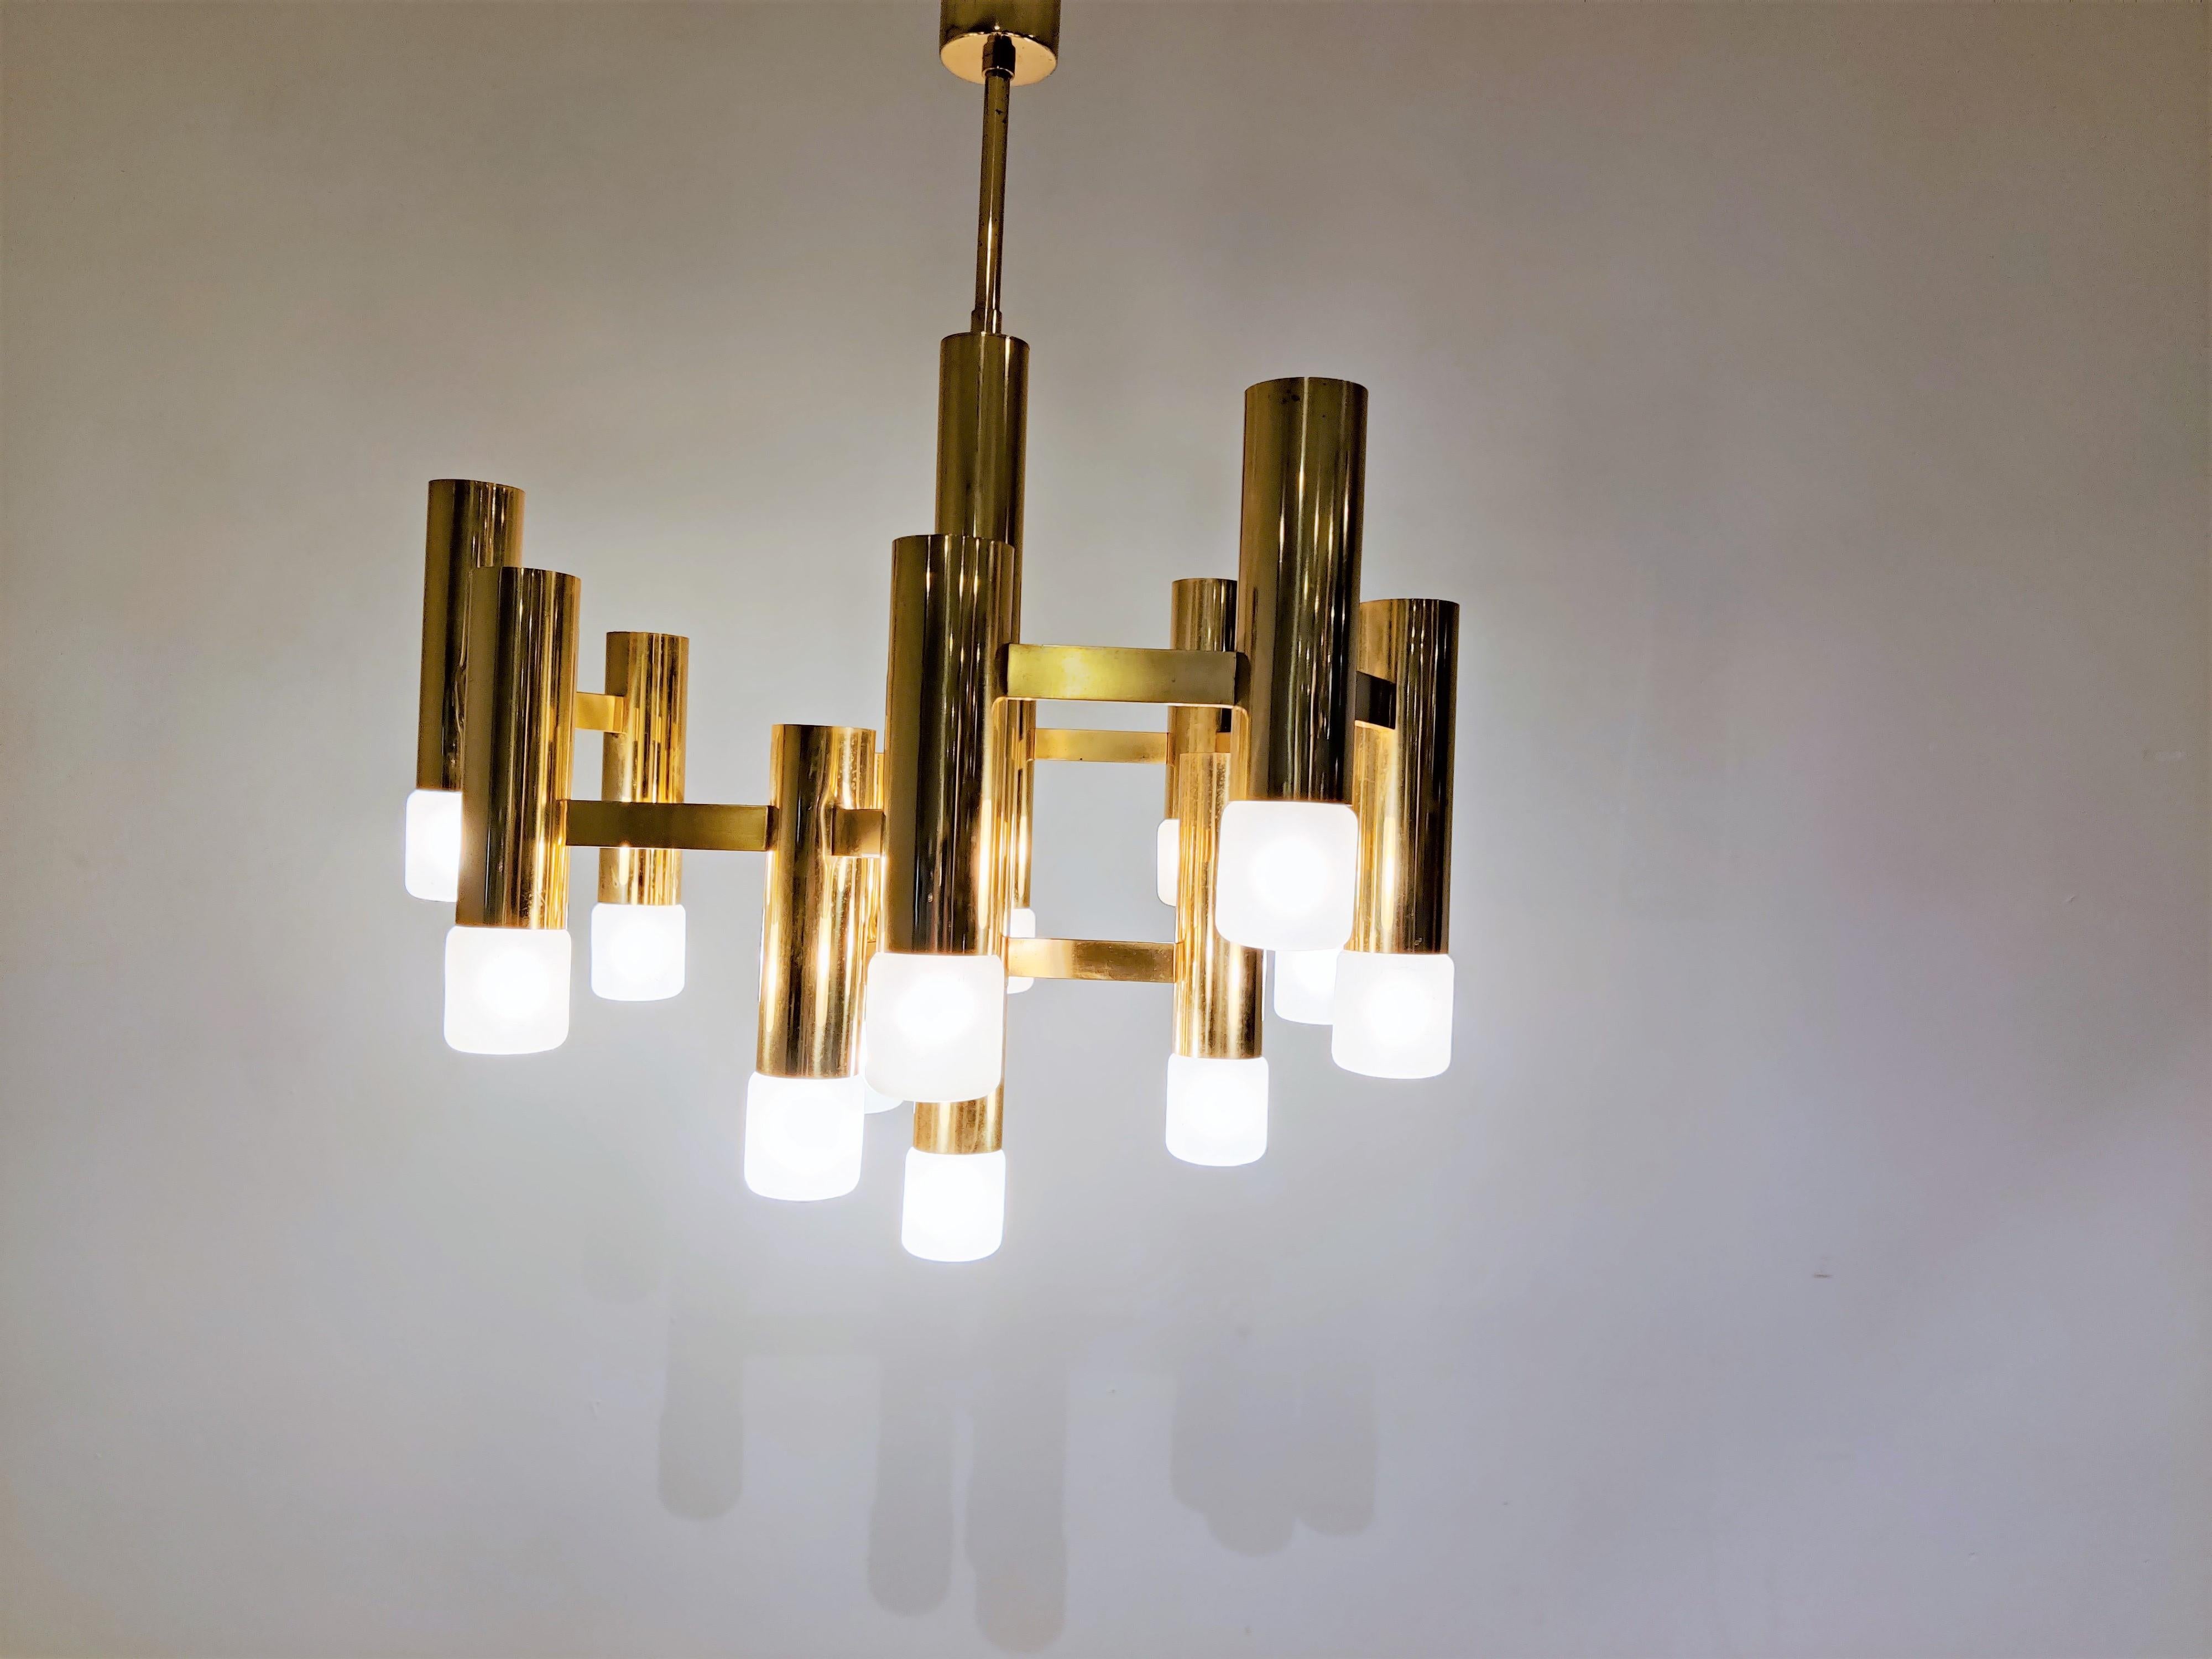 Tubular brass Gaetano Sciolari chandelier with 13 lightpoints.

Produced by Boulanger SA in Belgium

The chandelier is in very good condition and in full working order.

Tested and ready for use, chandelier will work all around the